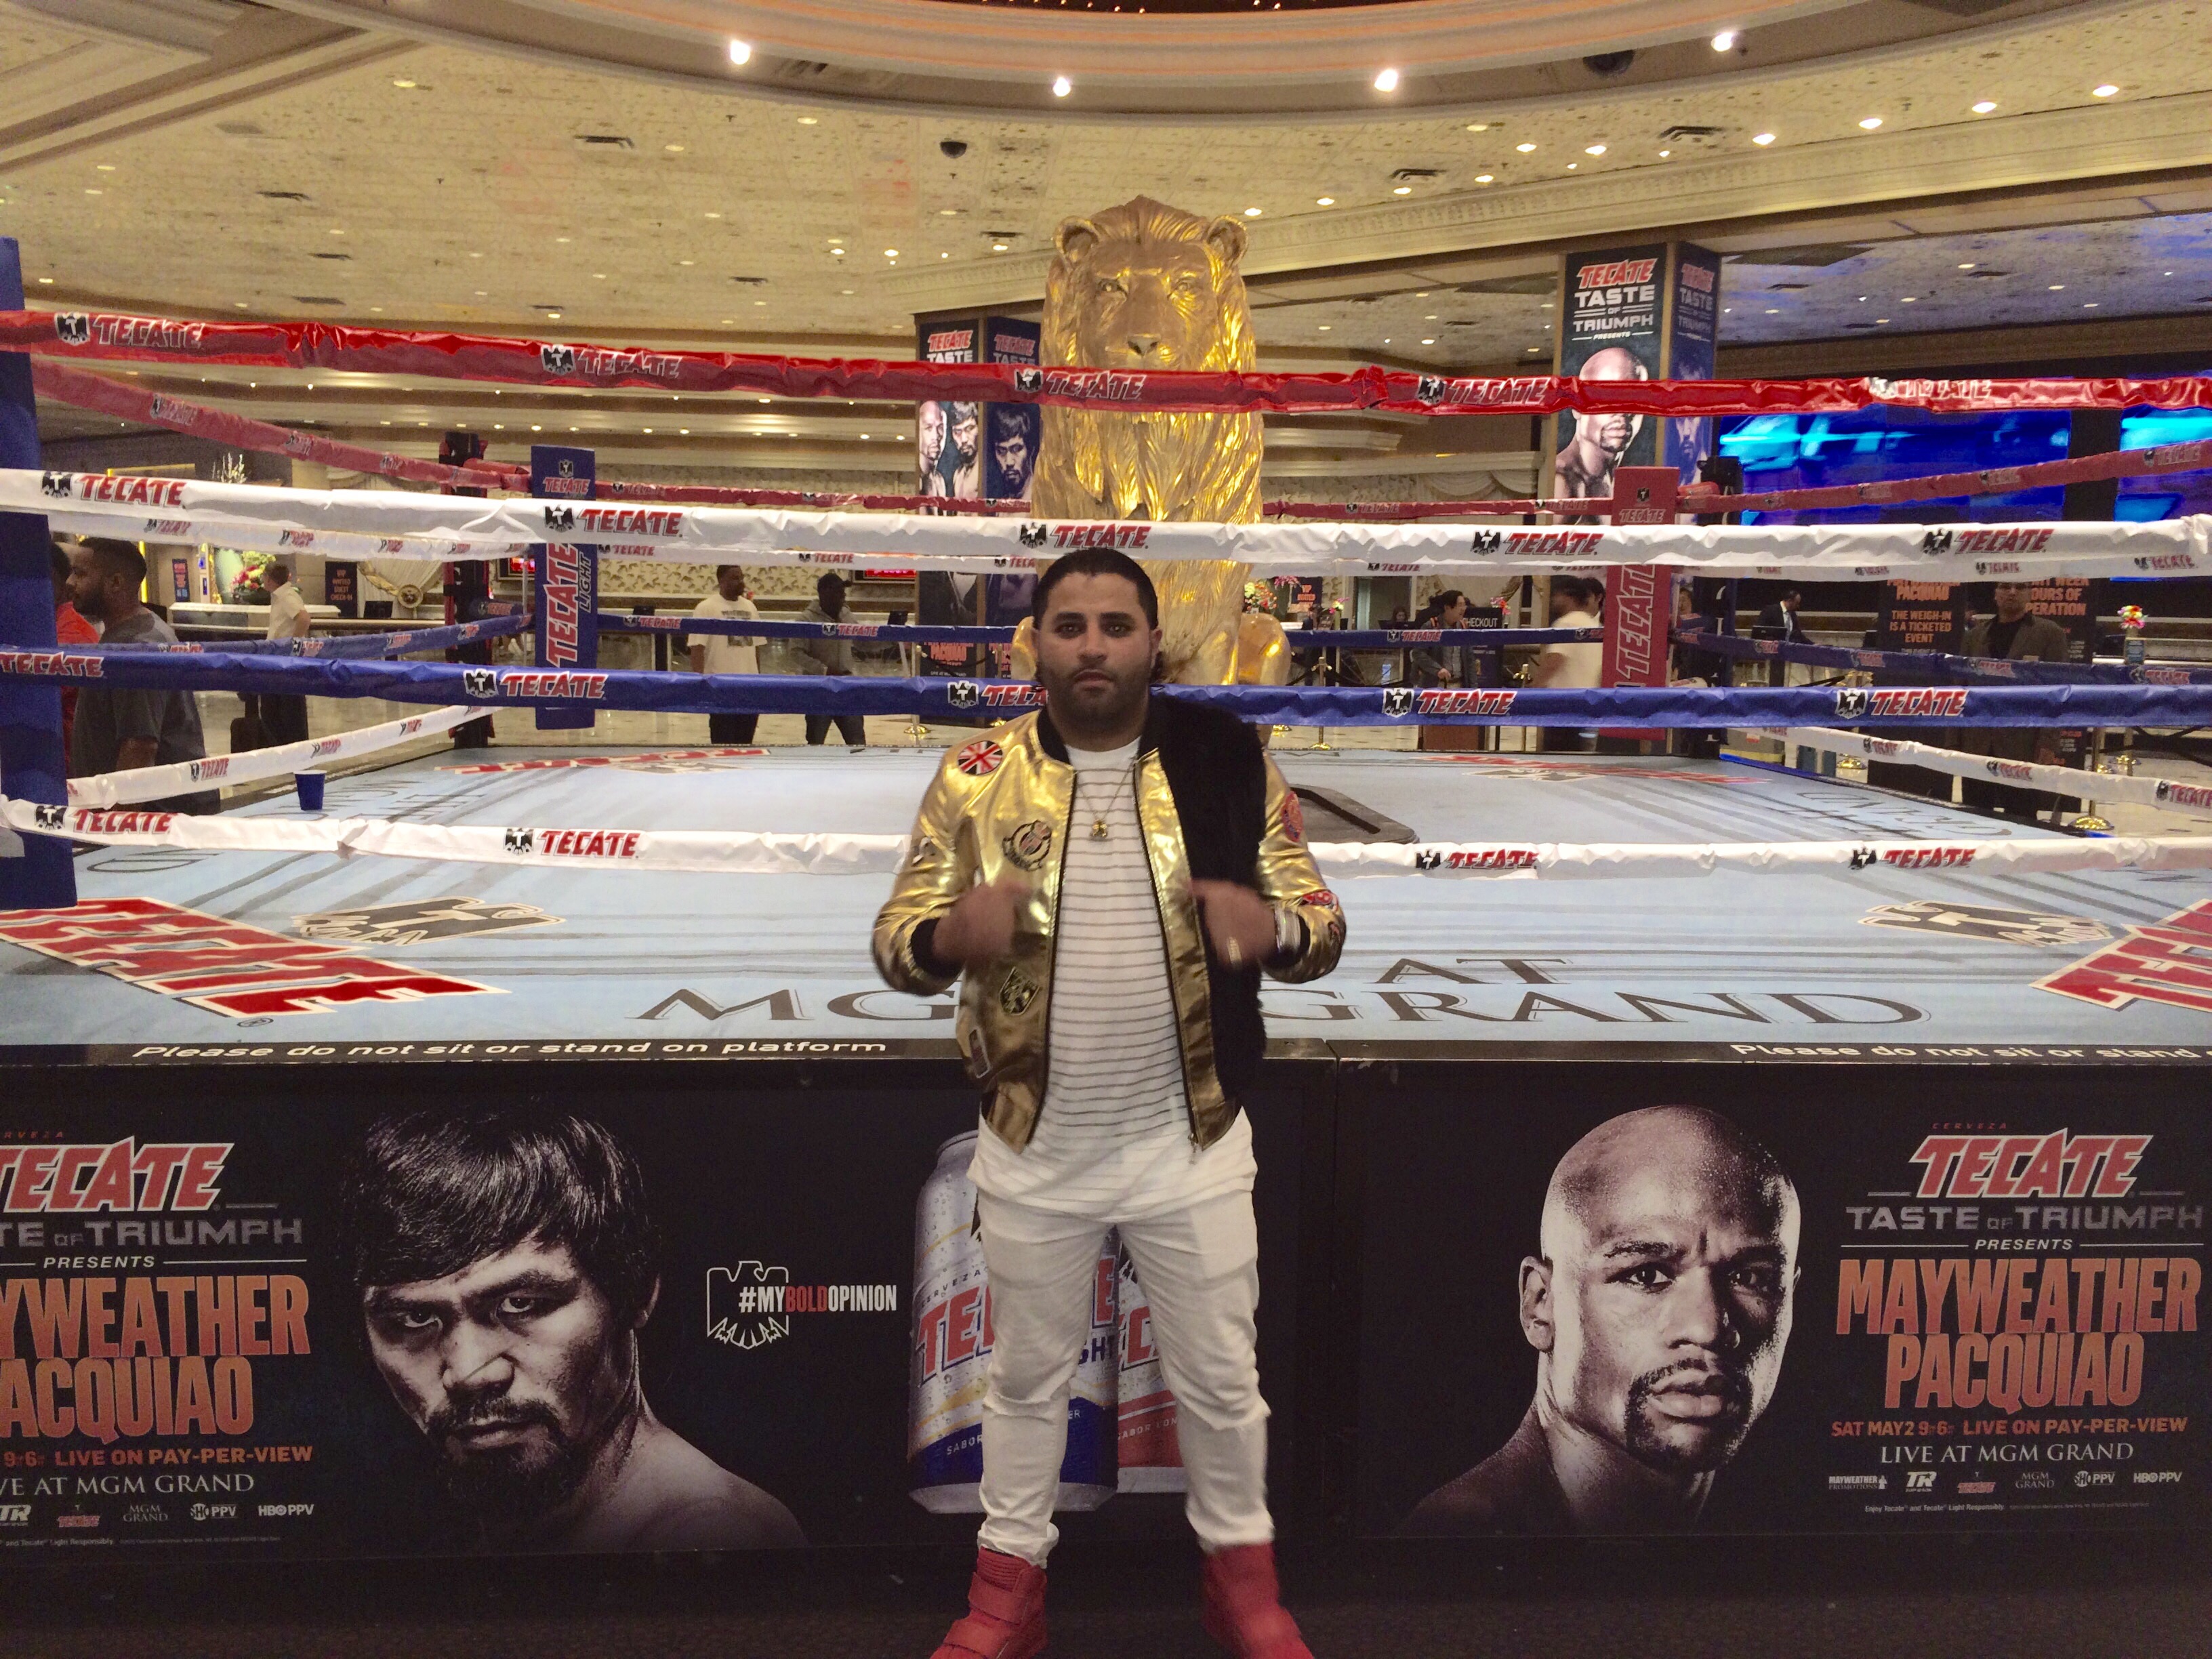 Thaer Al-Shayei at the MGM grand hotel and arena Las Vegas Nevada for one of the biggest boxing fights in history! Floyd Mayweather Jr vs Manny Paciuo 2015.